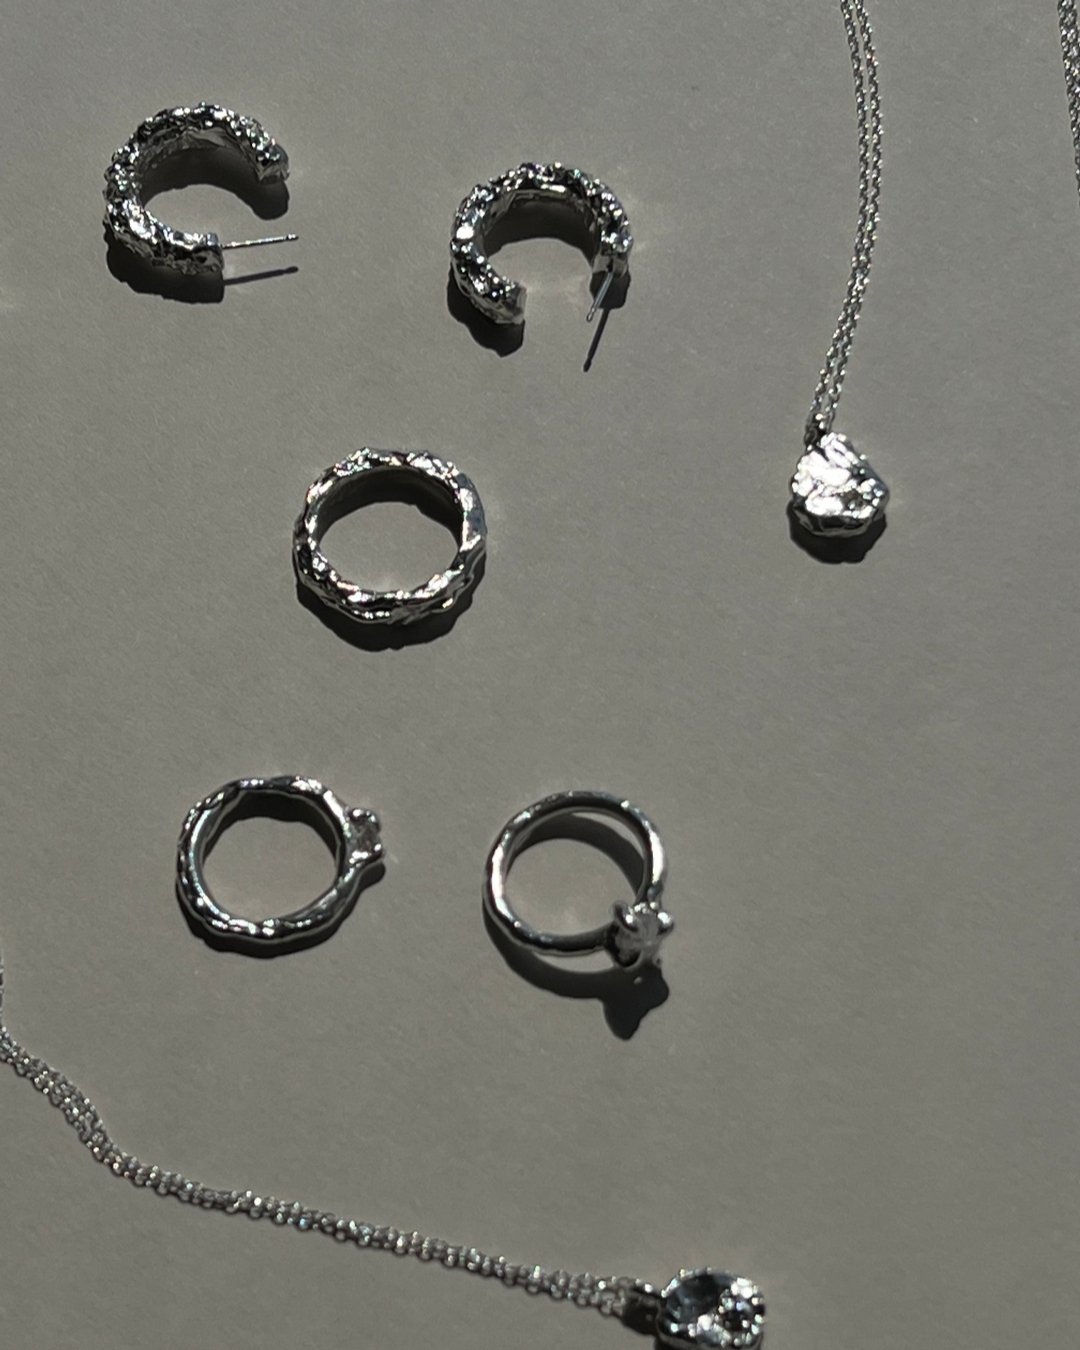 A few one-off pieces are still available on the website. Shop them today ✨

-​​​​​​​​
-​​​​​​​​
-​​​​​​​​
-​​​​​​​​
-​​​​​​​​
#keyna #keynajewellery #sustainablejewellery #recycledmetals #recycledsilver #sustainablefashion #slowfashion #solidgold #st